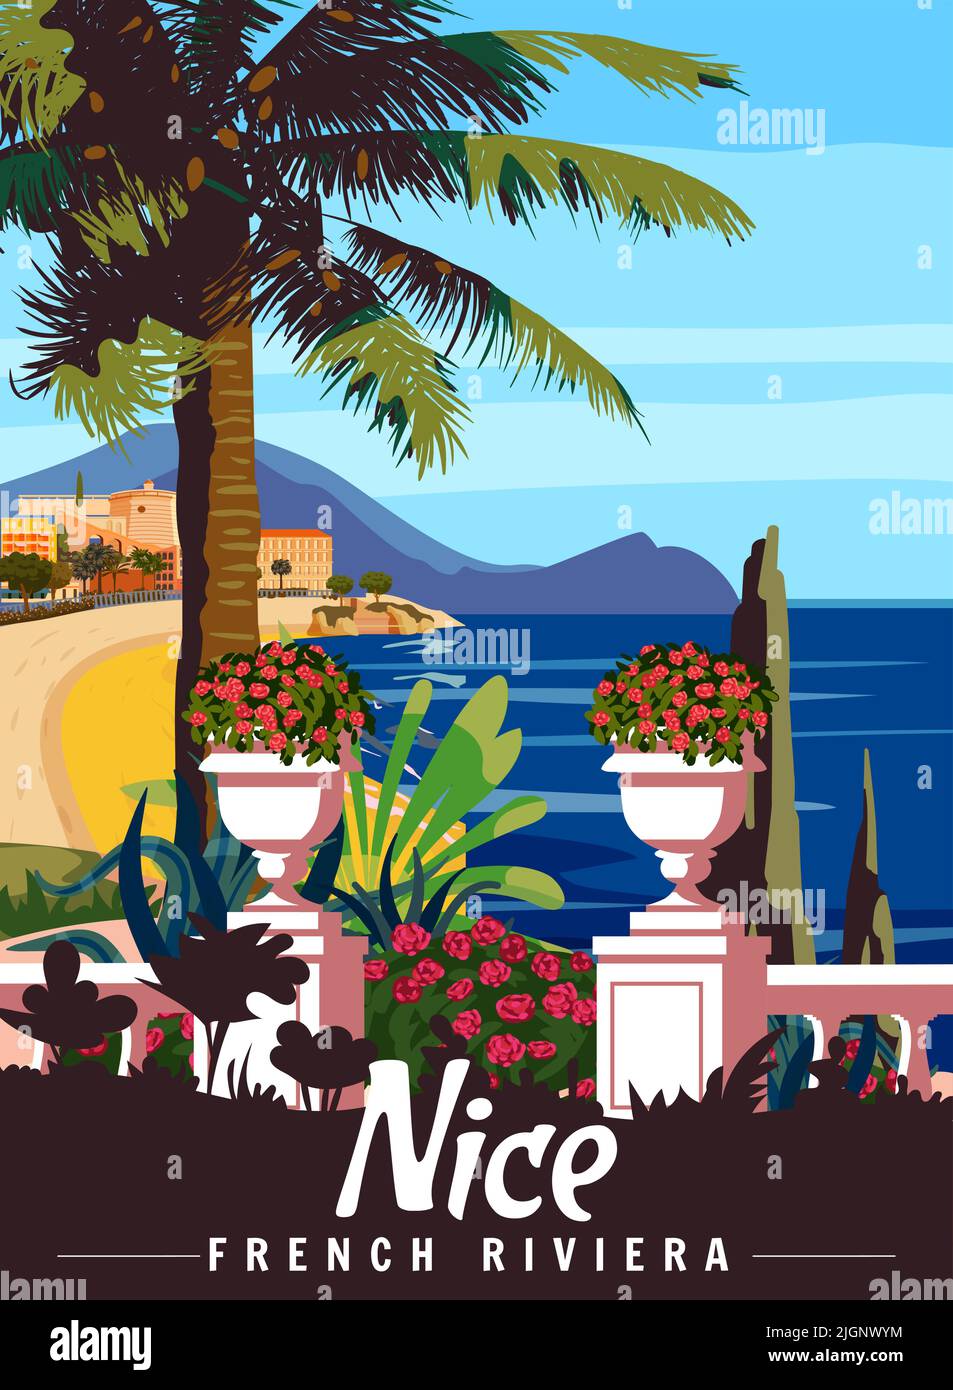 Cannes france palm tree Stock Vector Images - Alamy